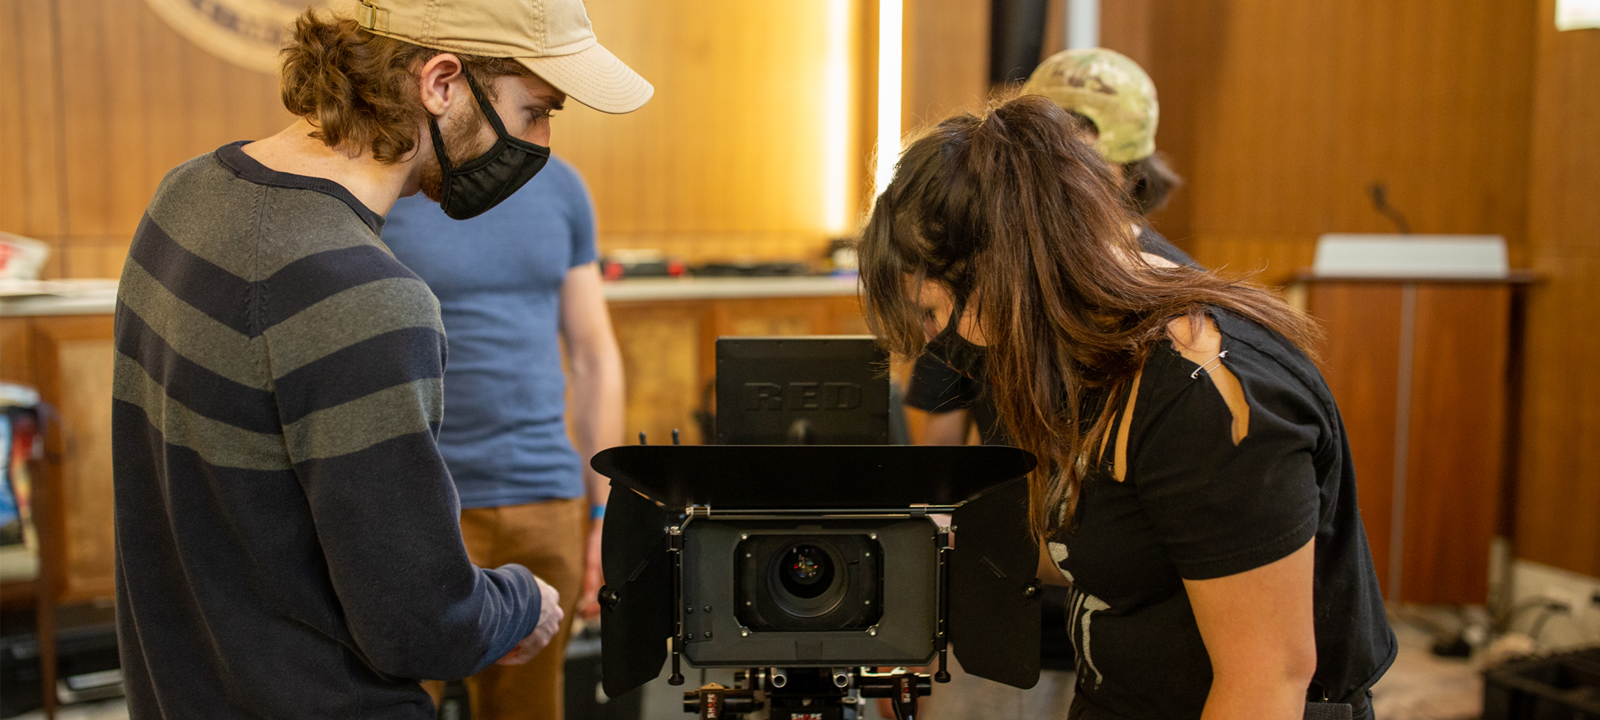 Our Digital Filmmaking program is planted in the heart of Hollywood South with major films working day and night both on and around our beautiful campus.